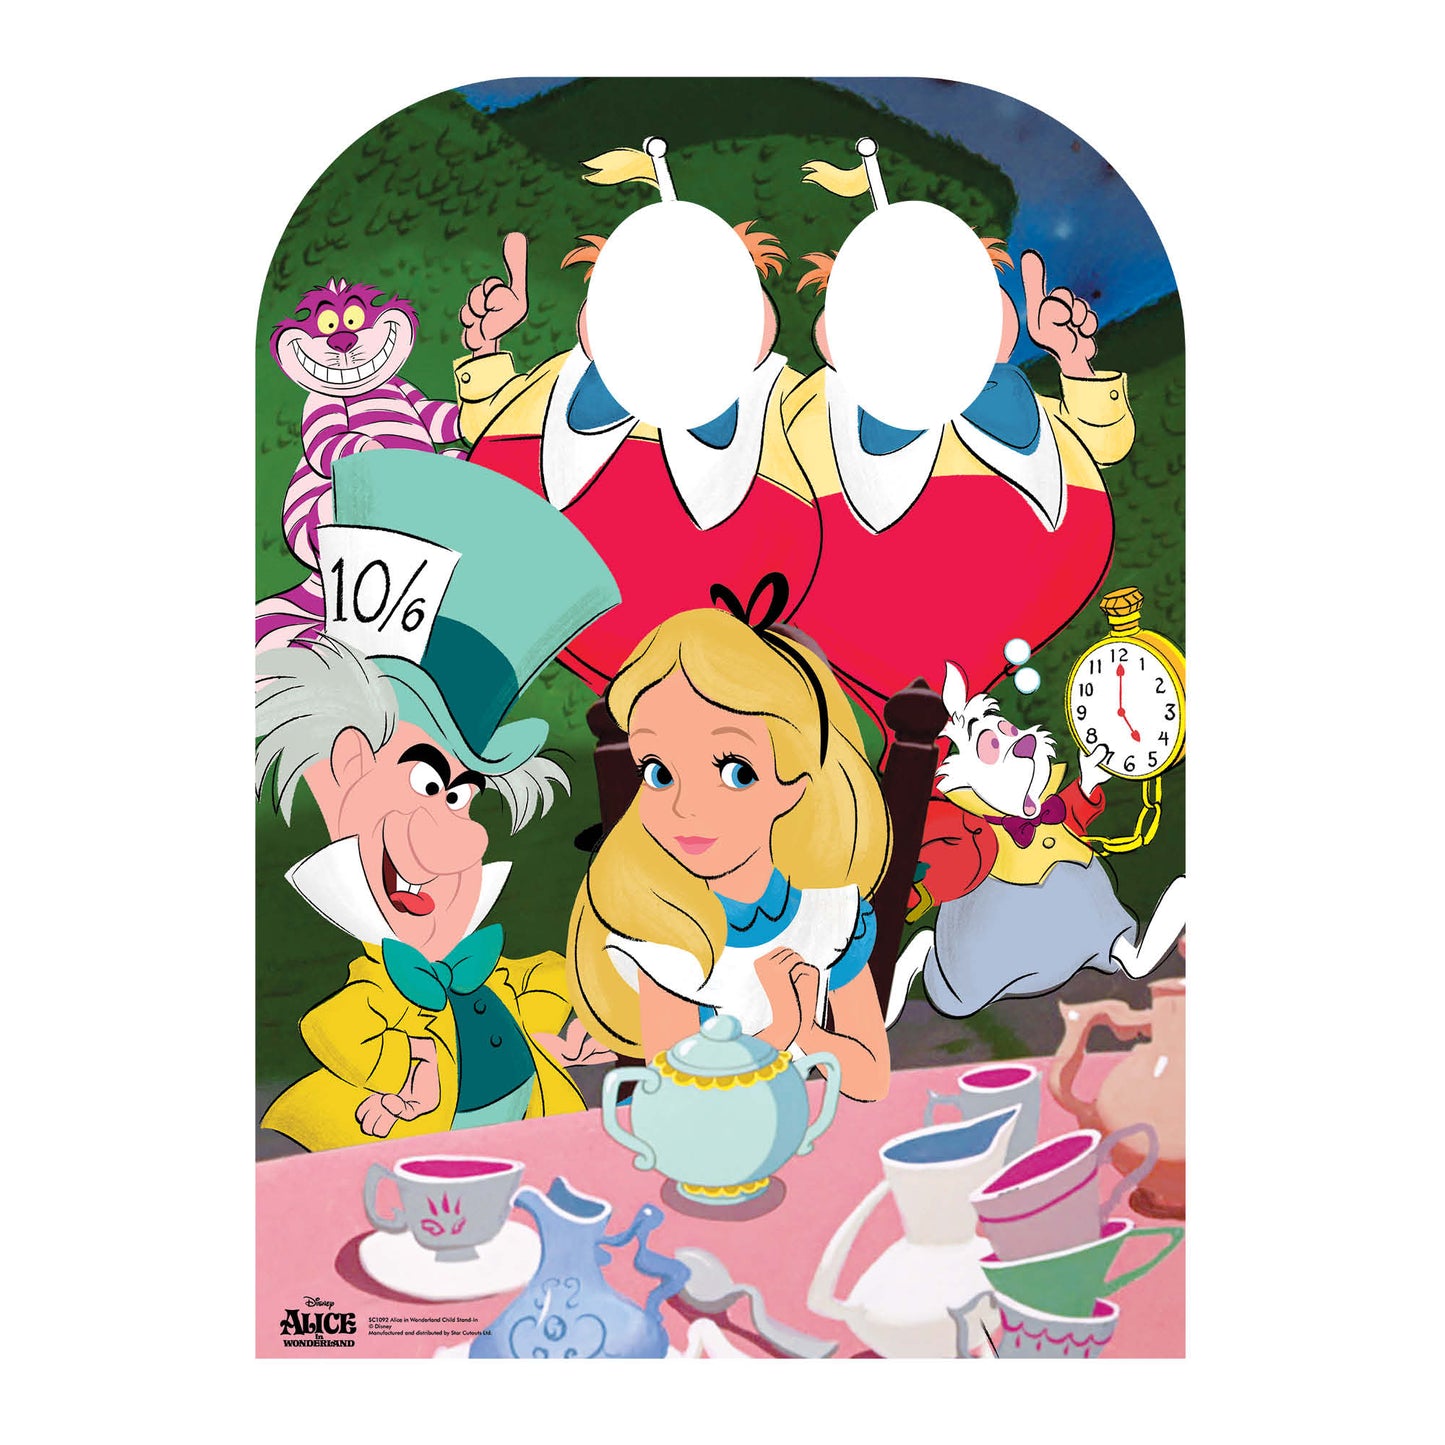 Tea Party Child Stand-in Cardboard Cutout Disney Official Product Alice in Wonderland